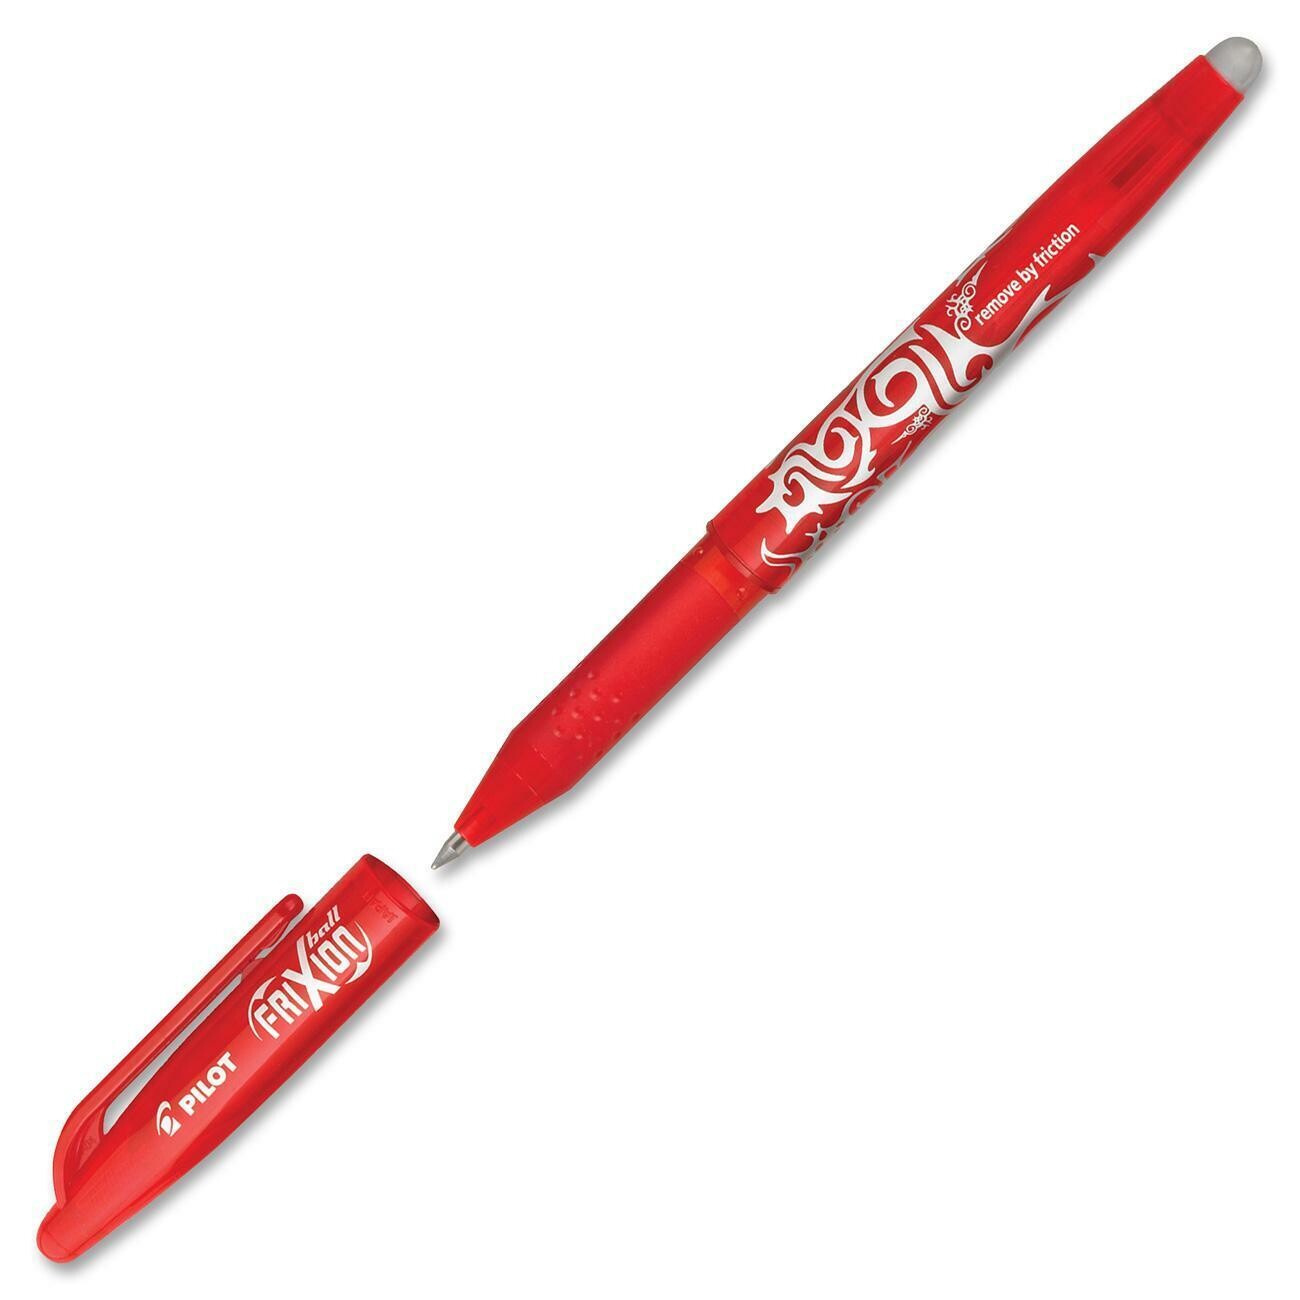 Pen, Erasable, Gel Rollerball, FriXion Red, Box of 12, 0.7 Mm, Refillable